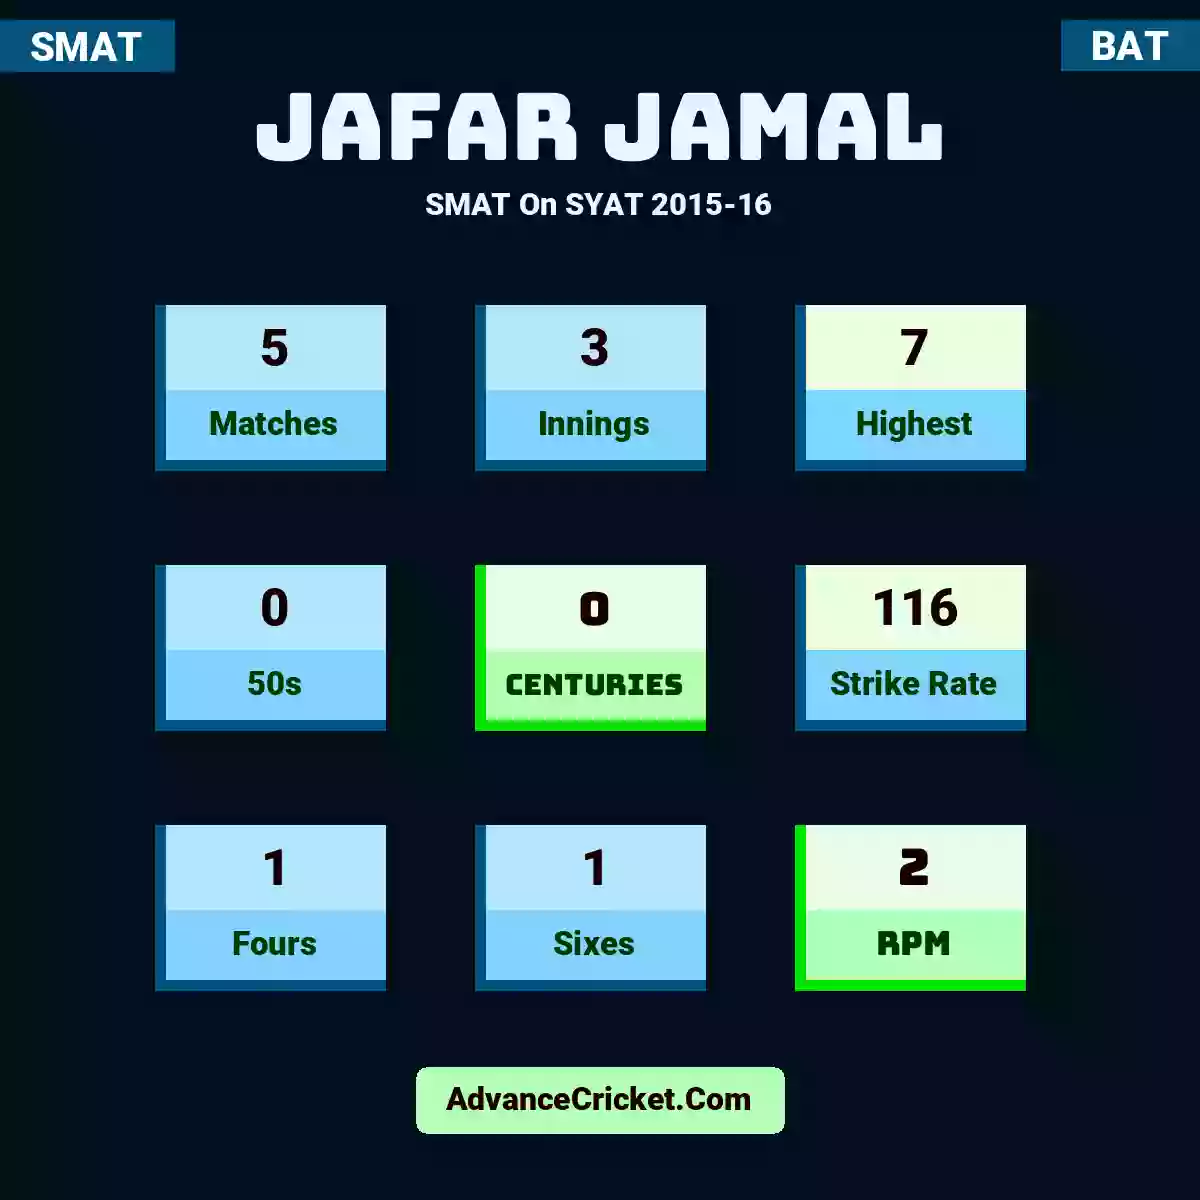 Jafar Jamal SMAT  On SYAT 2015-16, Jafar Jamal played 5 matches, scored 7 runs as highest, 0 half-centuries, and 0 centuries, with a strike rate of 116. J.Jamal hit 1 fours and 1 sixes, with an RPM of 2.